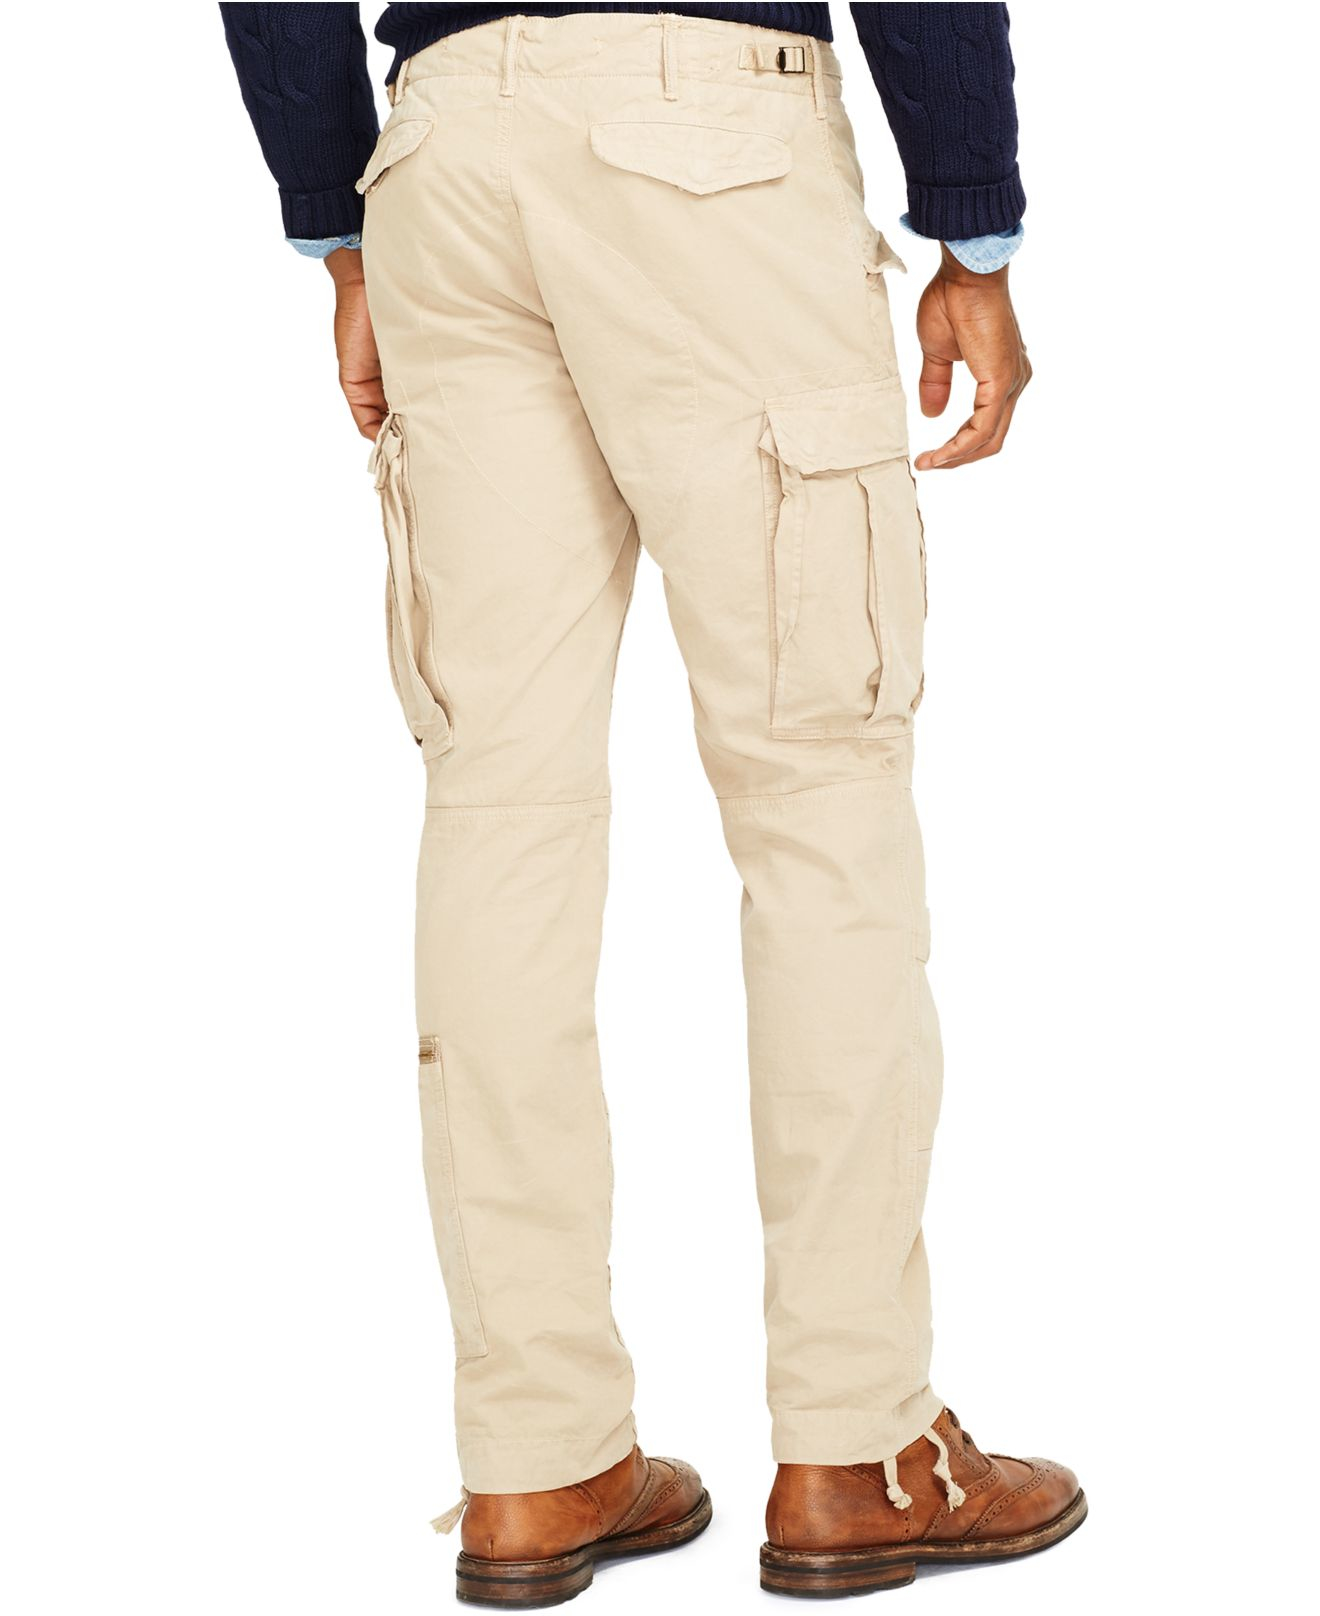 Polo Ralph Lauren Military Cargo Pant in Natural for Men - Lyst